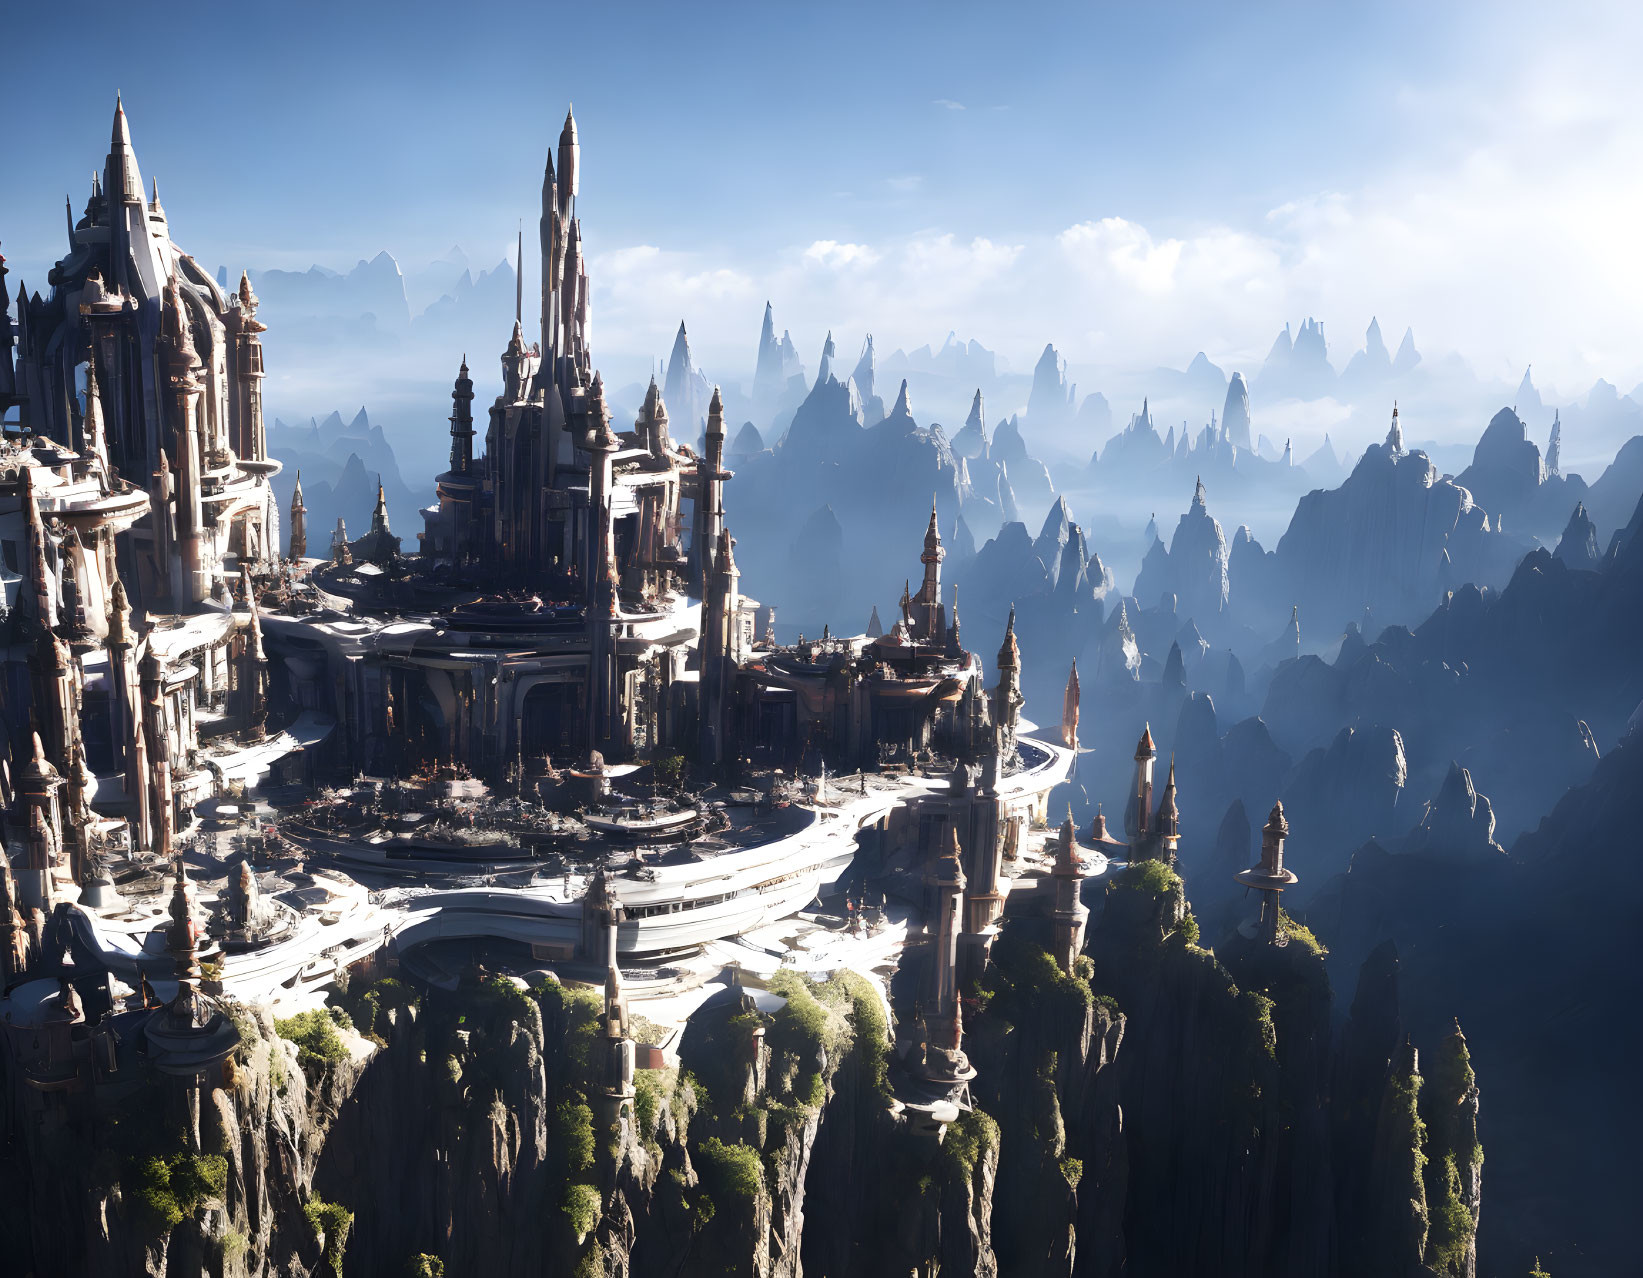 Fantastical cityscape with towering spires and floating mountains